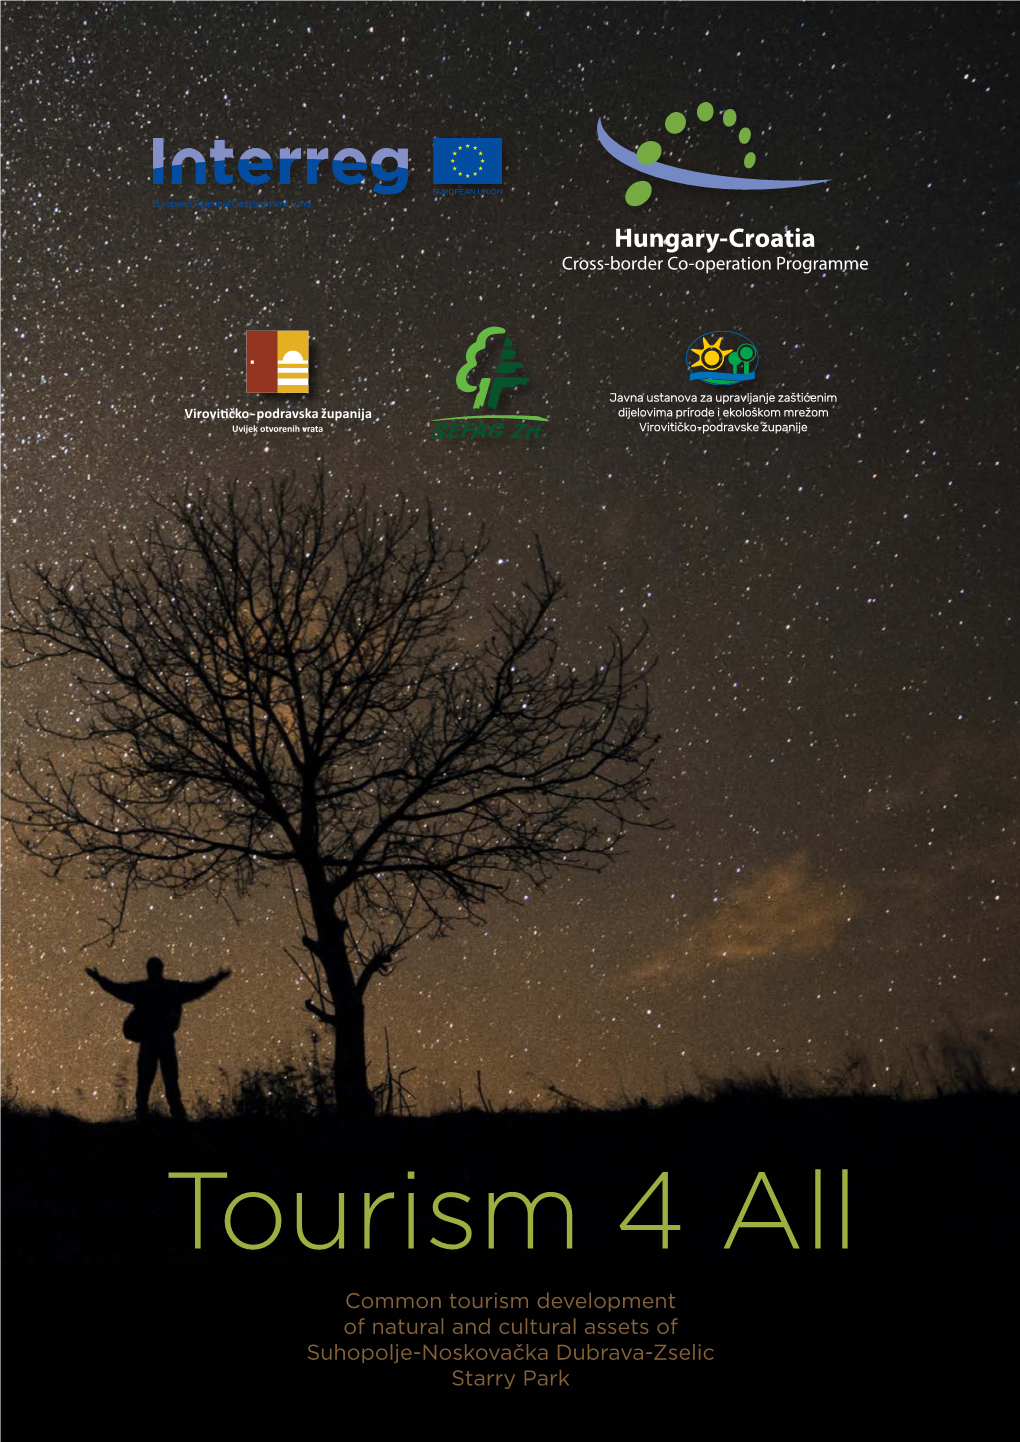 Tourism 4 All Common Tourism Development of Natural and Cultural Assets of Suhopolje-Noskovačka Dubrava-Zselic Tourism 4 All 1 Starry Park Tourism 4 All